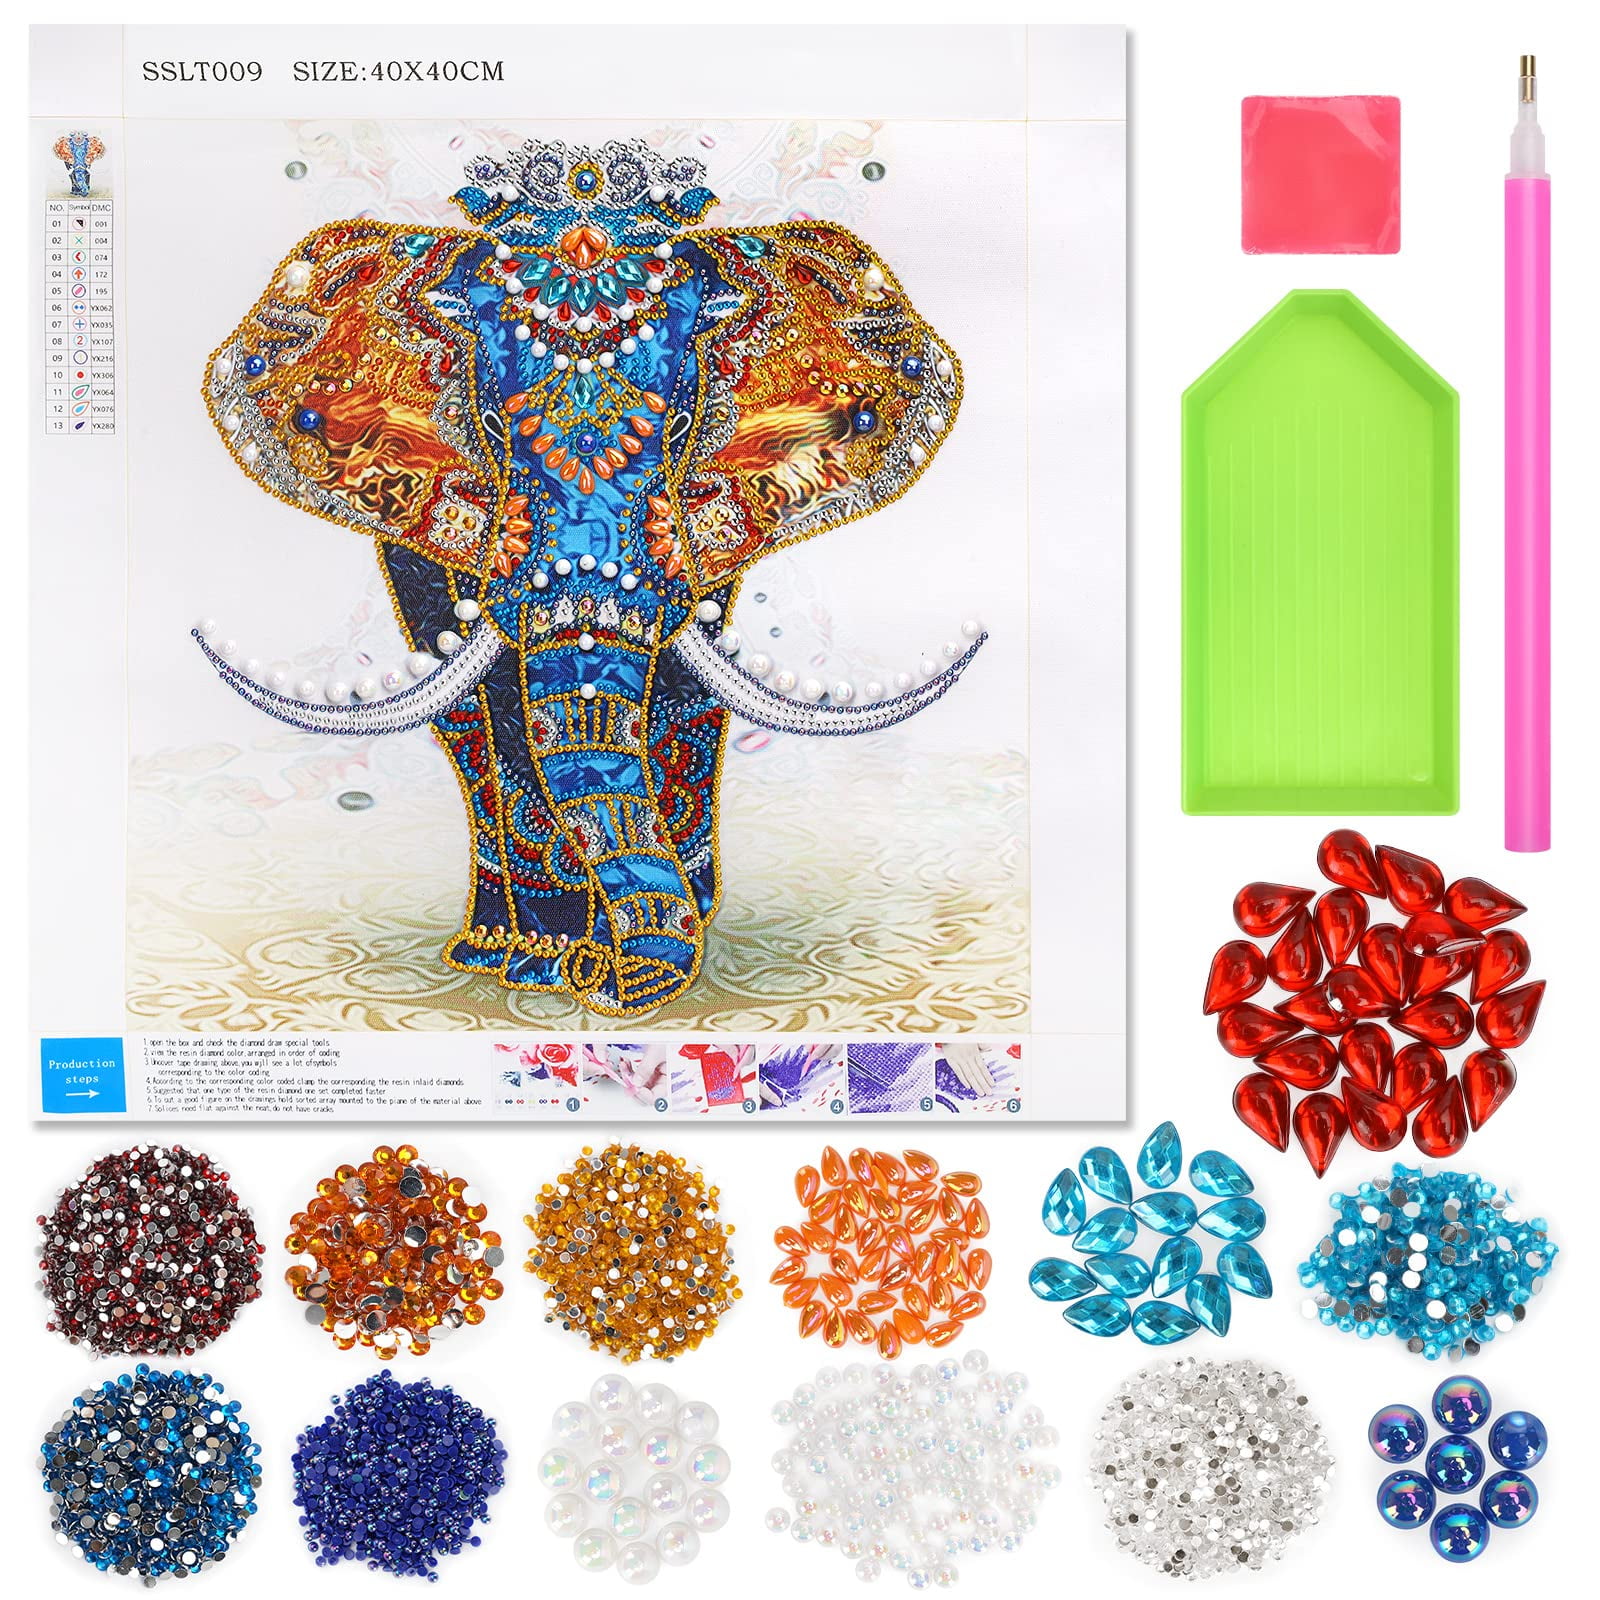 SUNNYPIG 5D Diamond Art for 8 9 10 11 12 Years Old Teens, Crafts Gifts for  Adult Kids Age 9-13 Paint by Numbers for Children Elephant Painting Kits